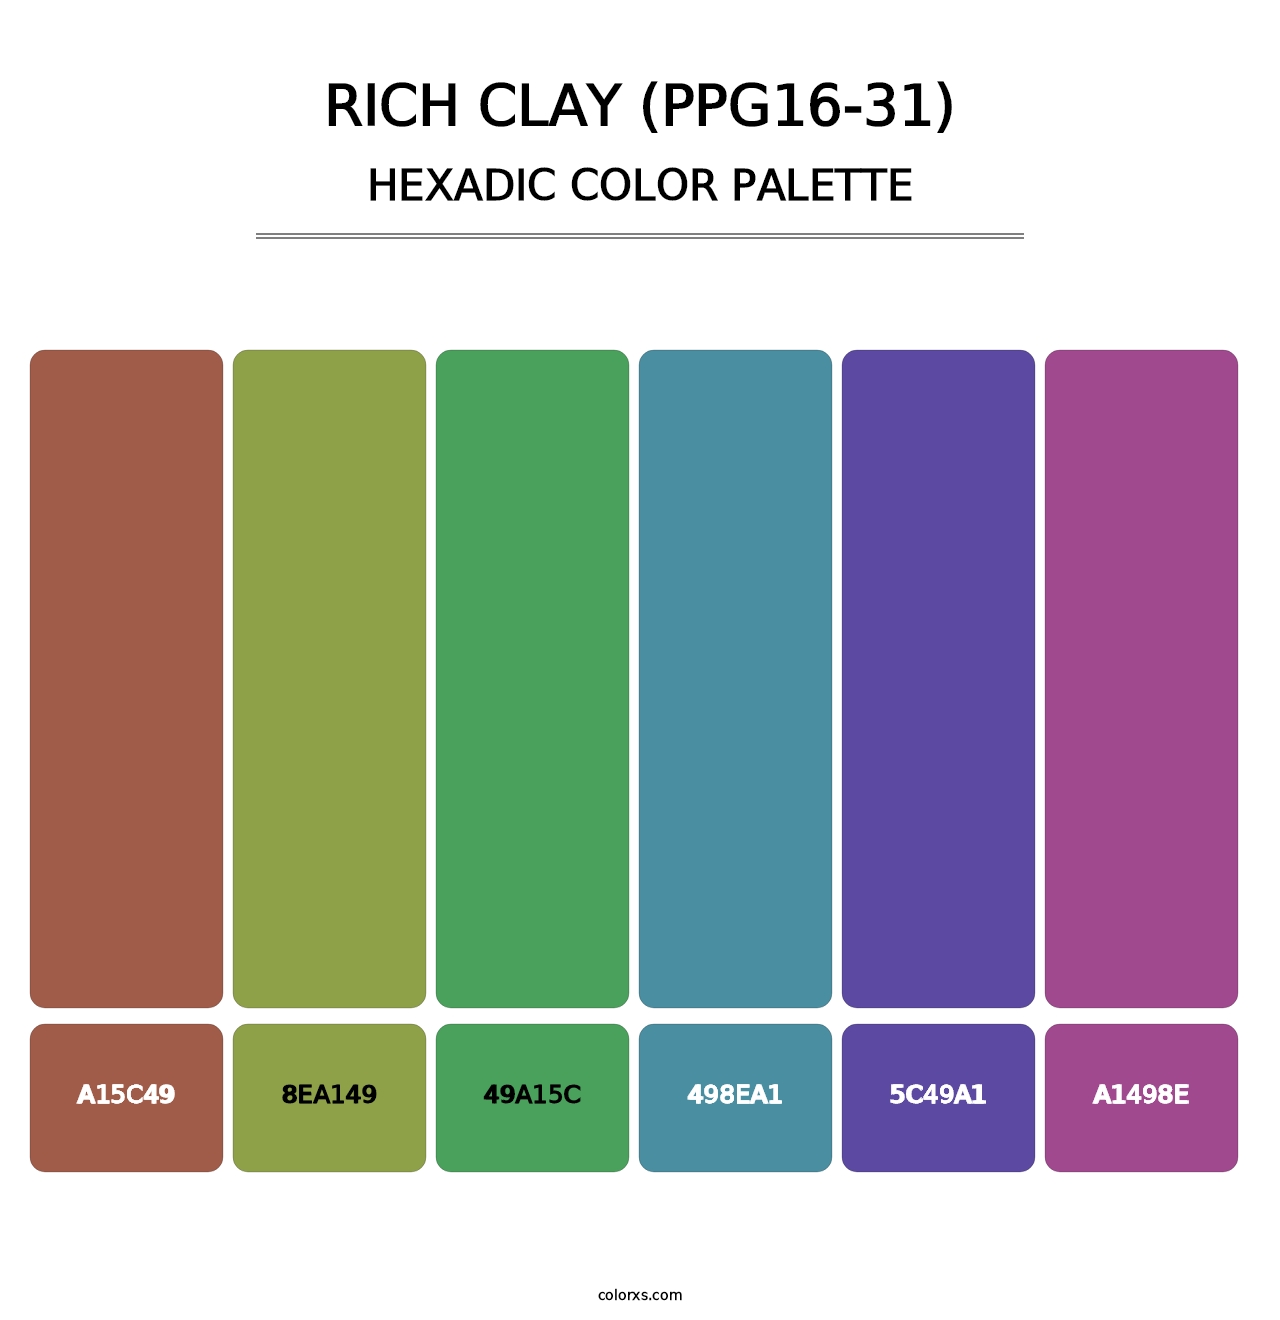 Rich Clay (PPG16-31) - Hexadic Color Palette